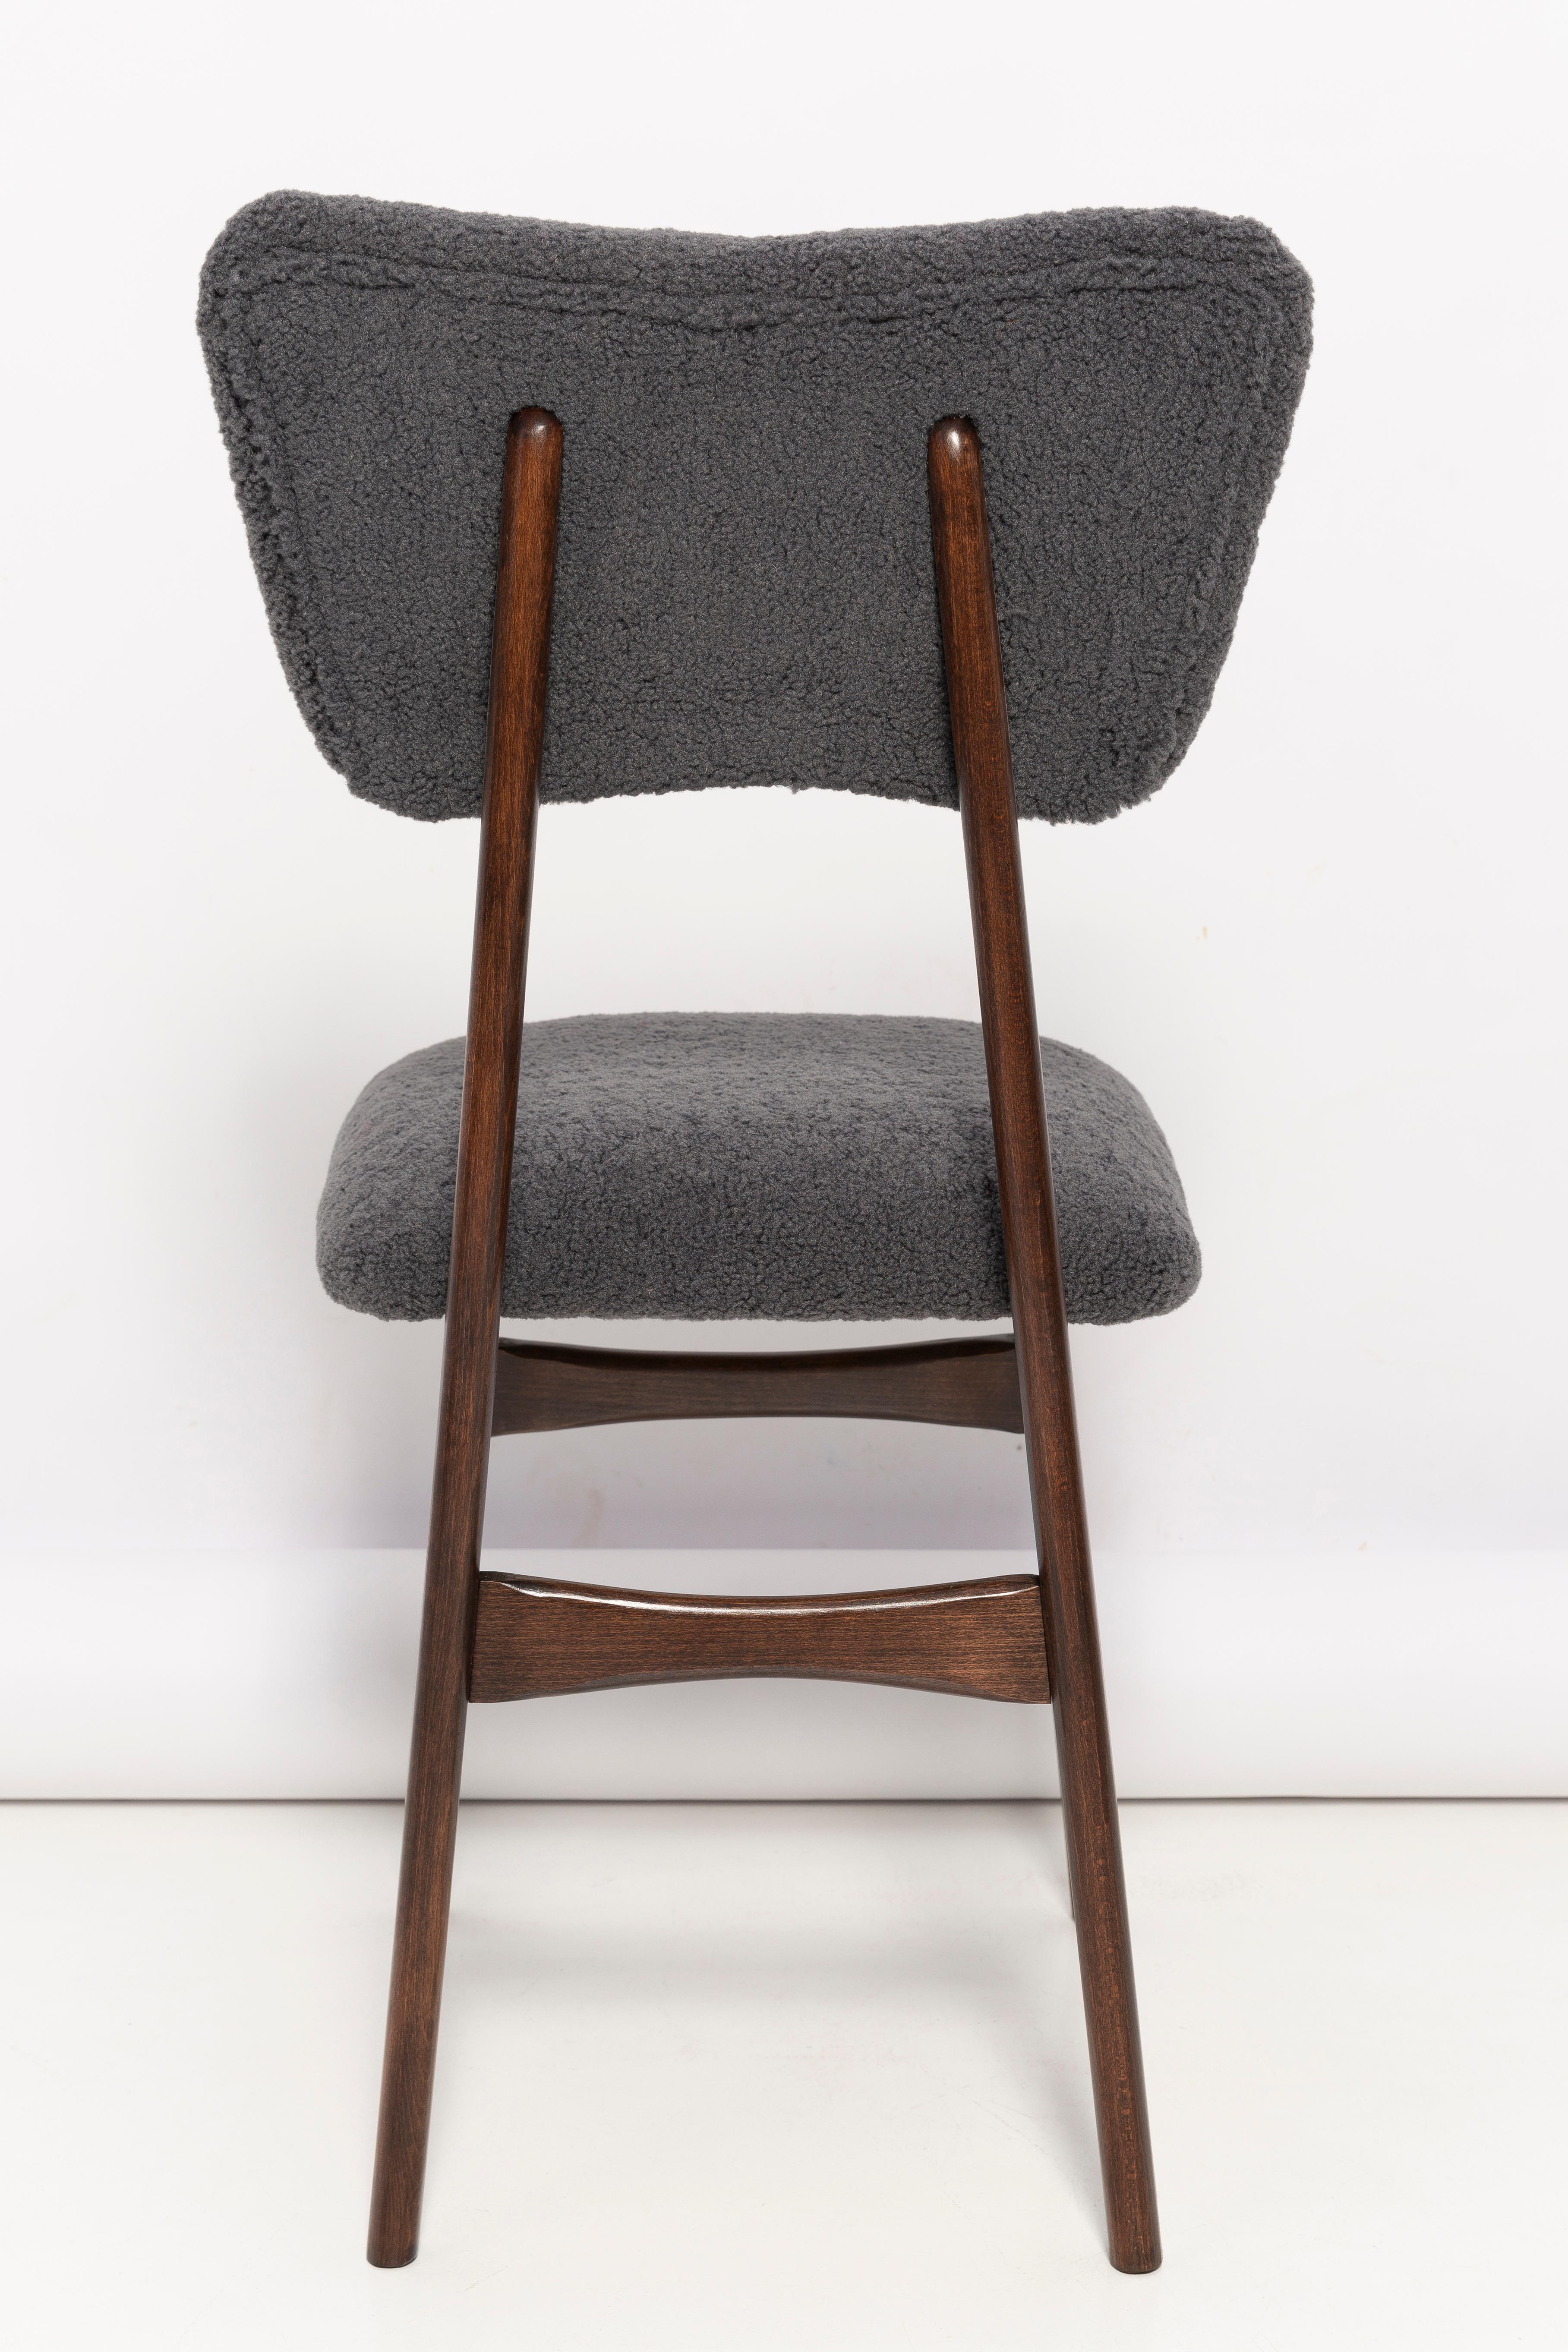 Bouclé Butterfly Dining Chair, Gray Boucle, Dark Wood, by Vintola Studio, Poland, Europe For Sale